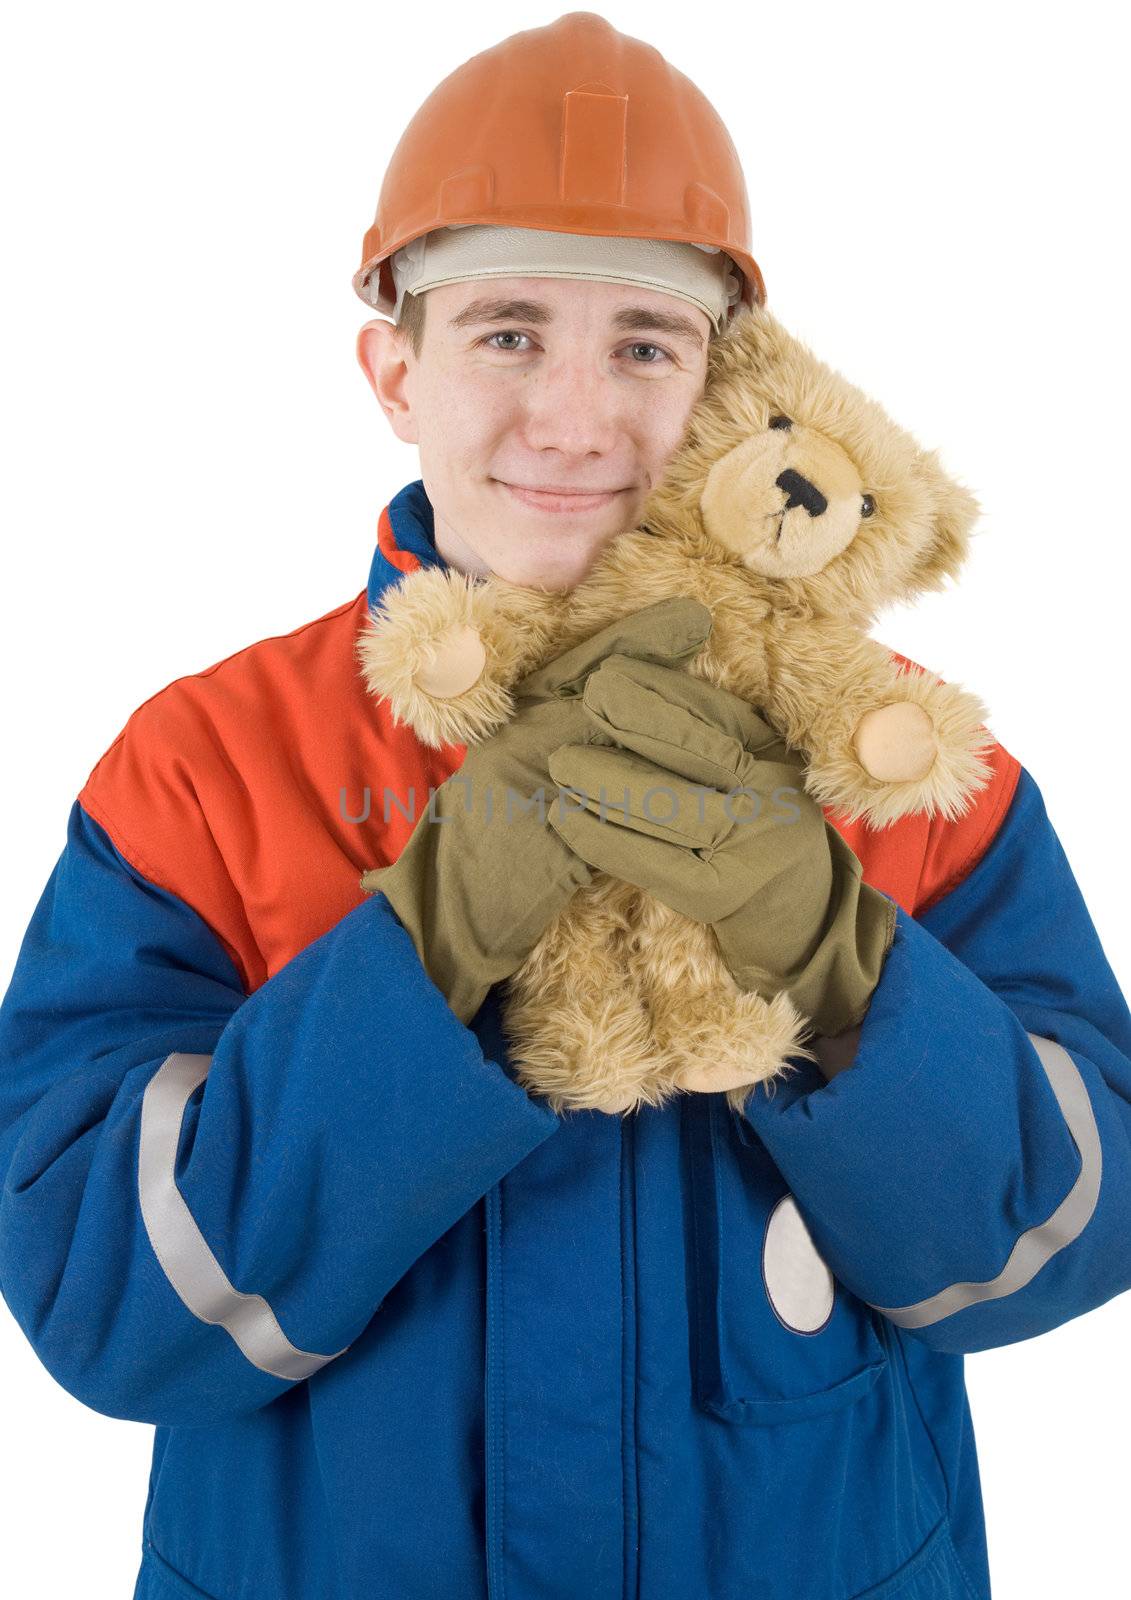 Man in overalls hold toy bear on the hands